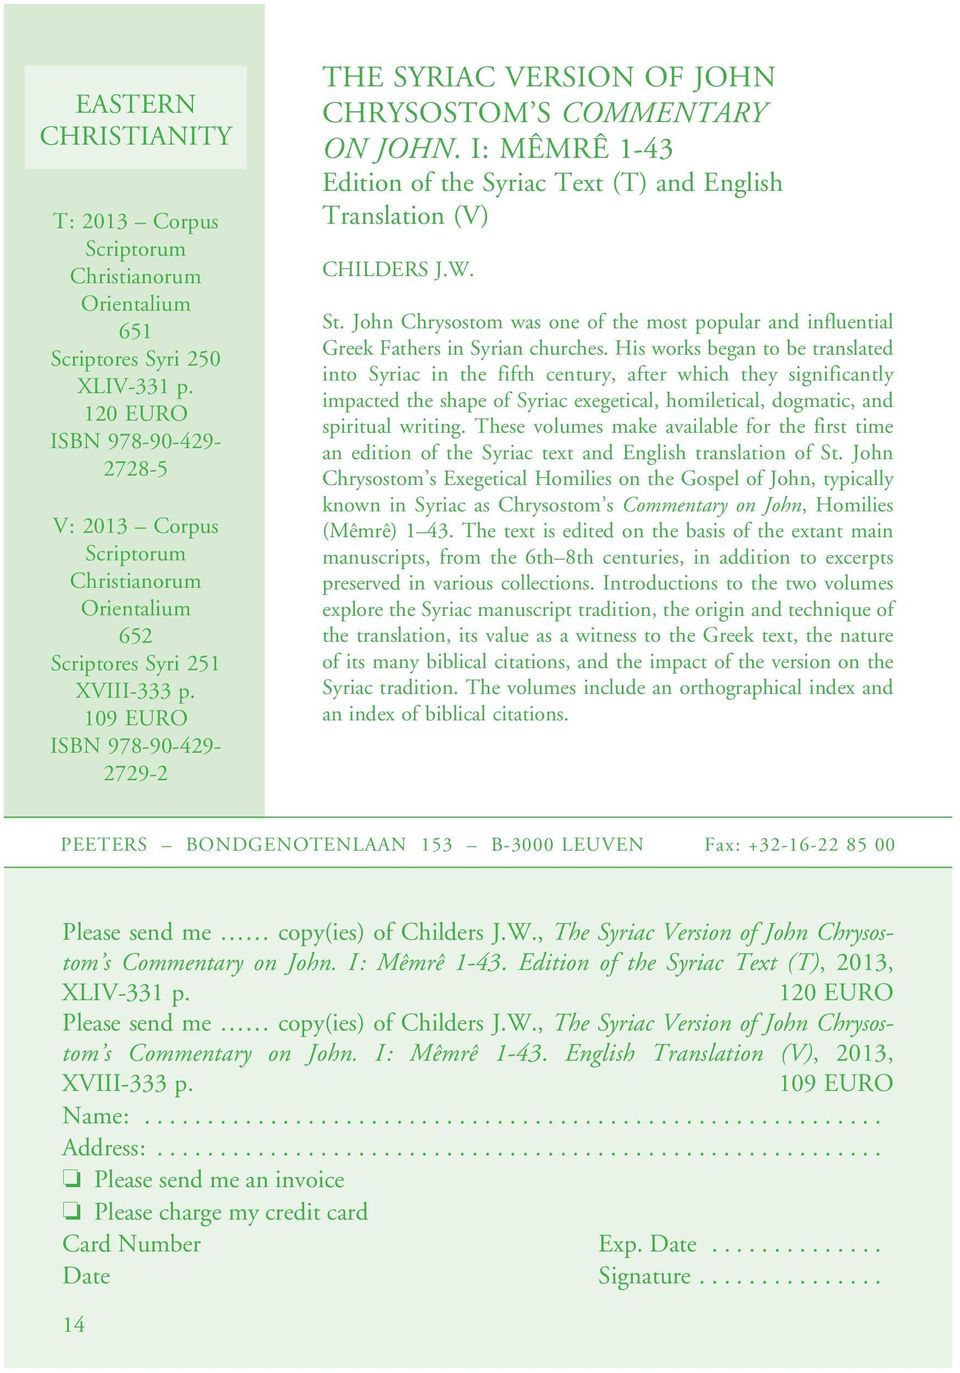 I: MÊMRÊ 1-43 Edition of the Syriac Text (T) and English Translation (V) CHILDERS J.W. St. John Chrysostom was one of the most popular and influential Greek Fathers in Syrian churches.